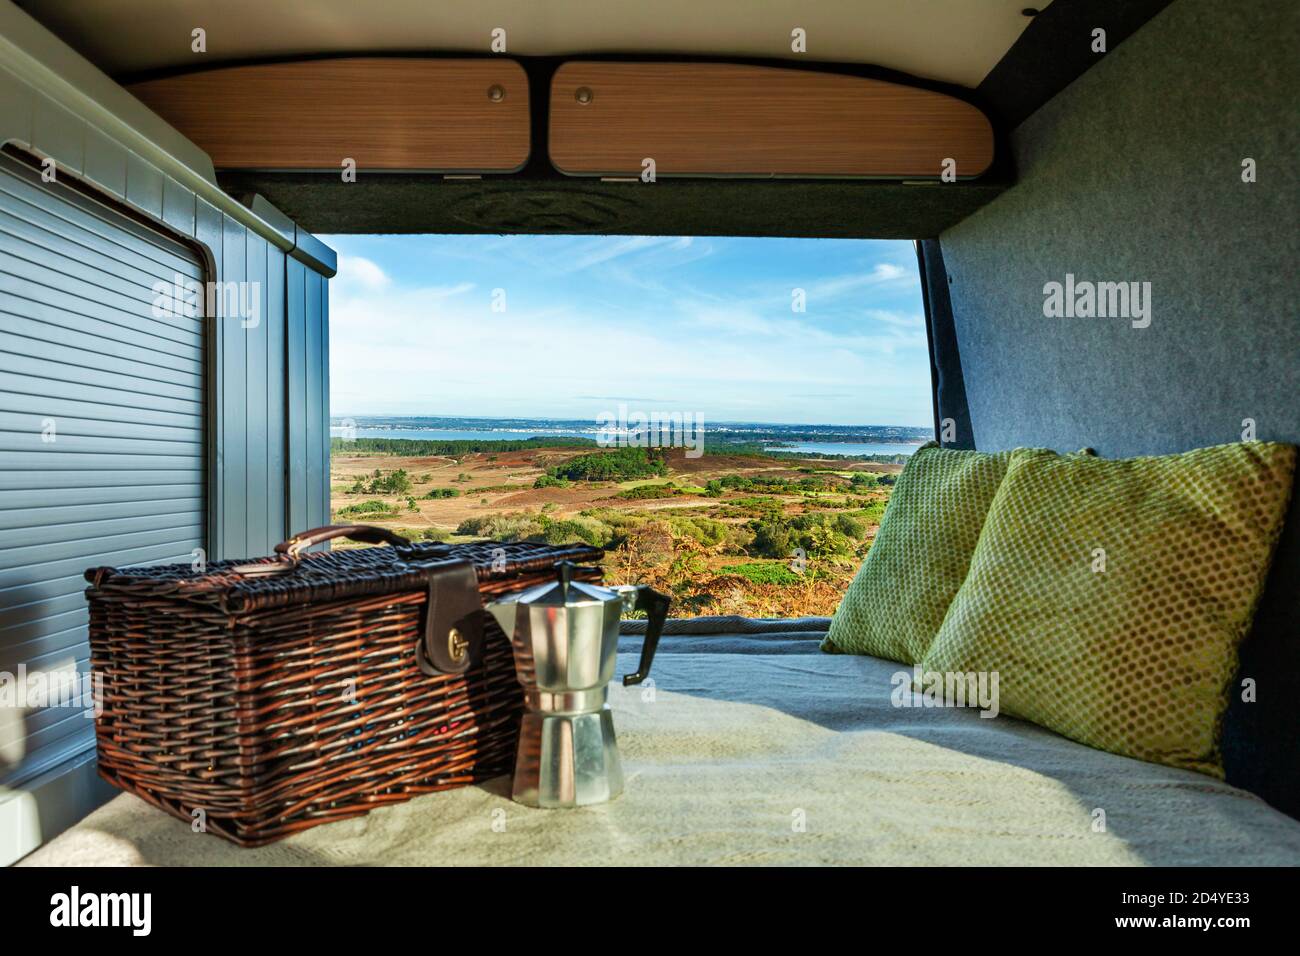 Taken from a camper van with a hamper, stovetop coffee maker and cushions, overlooking the view at Poole harbour, on a bright Autumn day. Stock Photo